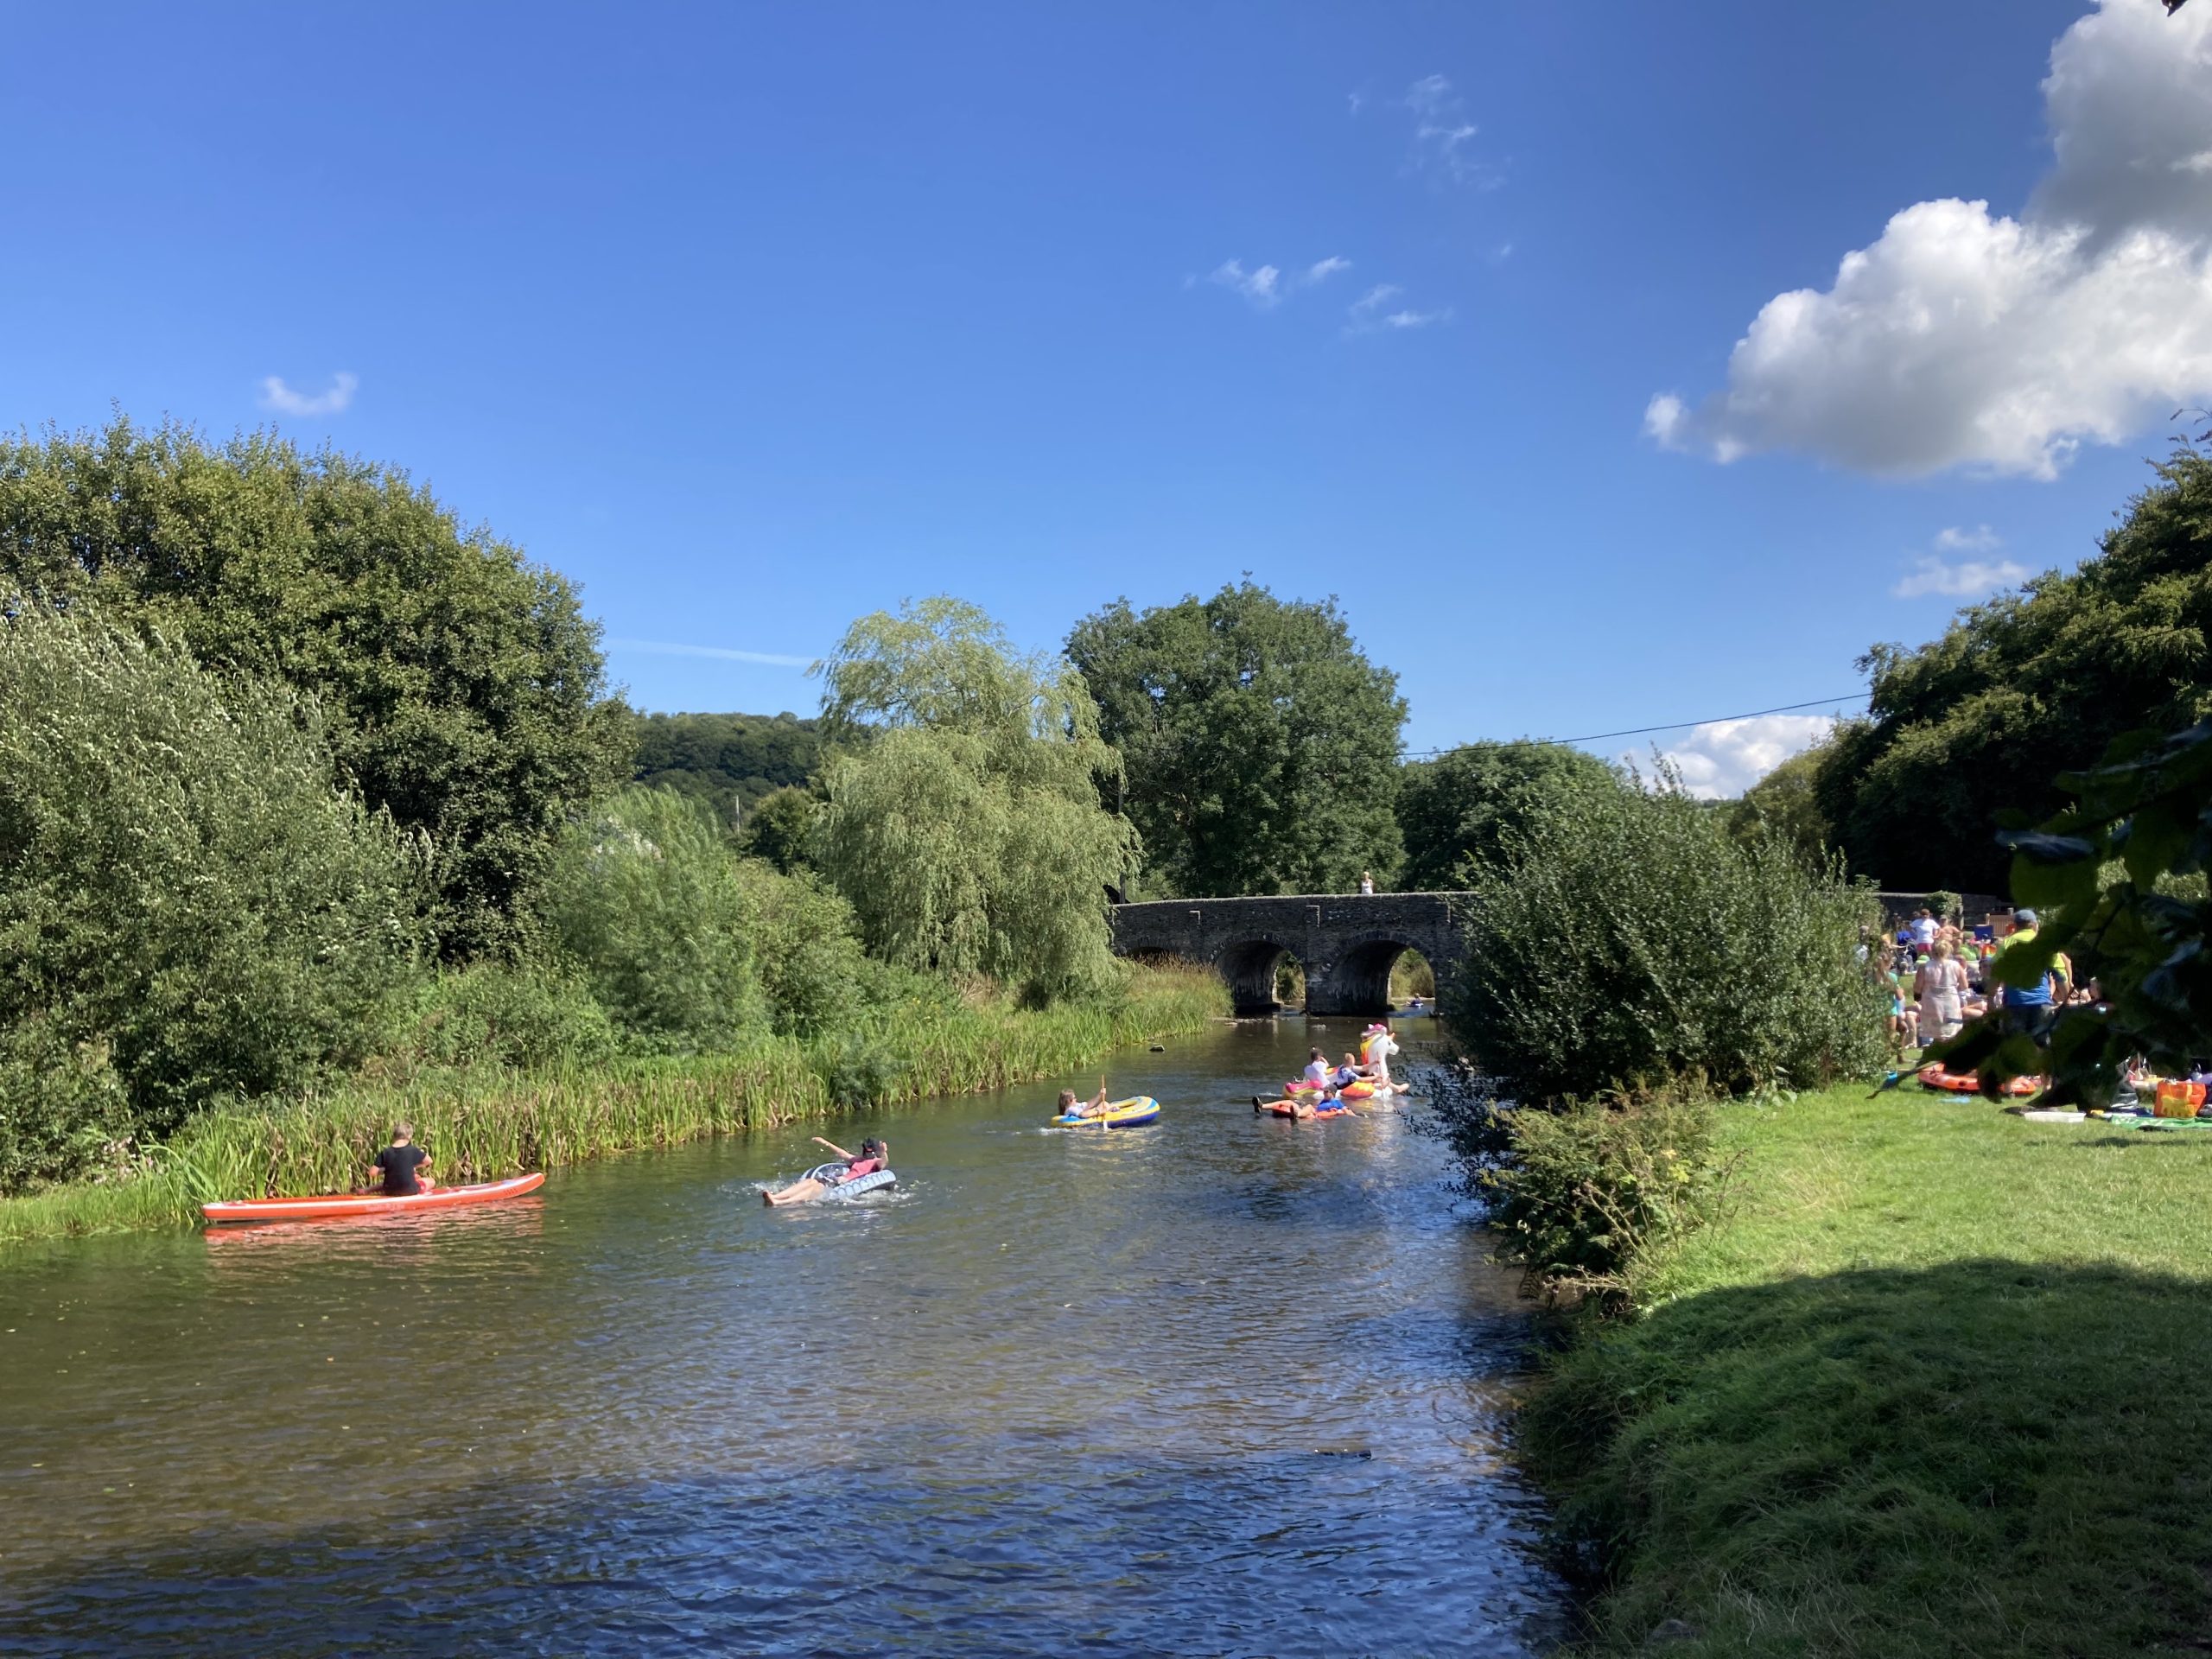 People swimming & canoeing on the river near Withypool in Exmoor, arched bridge in the distance, sunny weather shining on the river and grassy banks